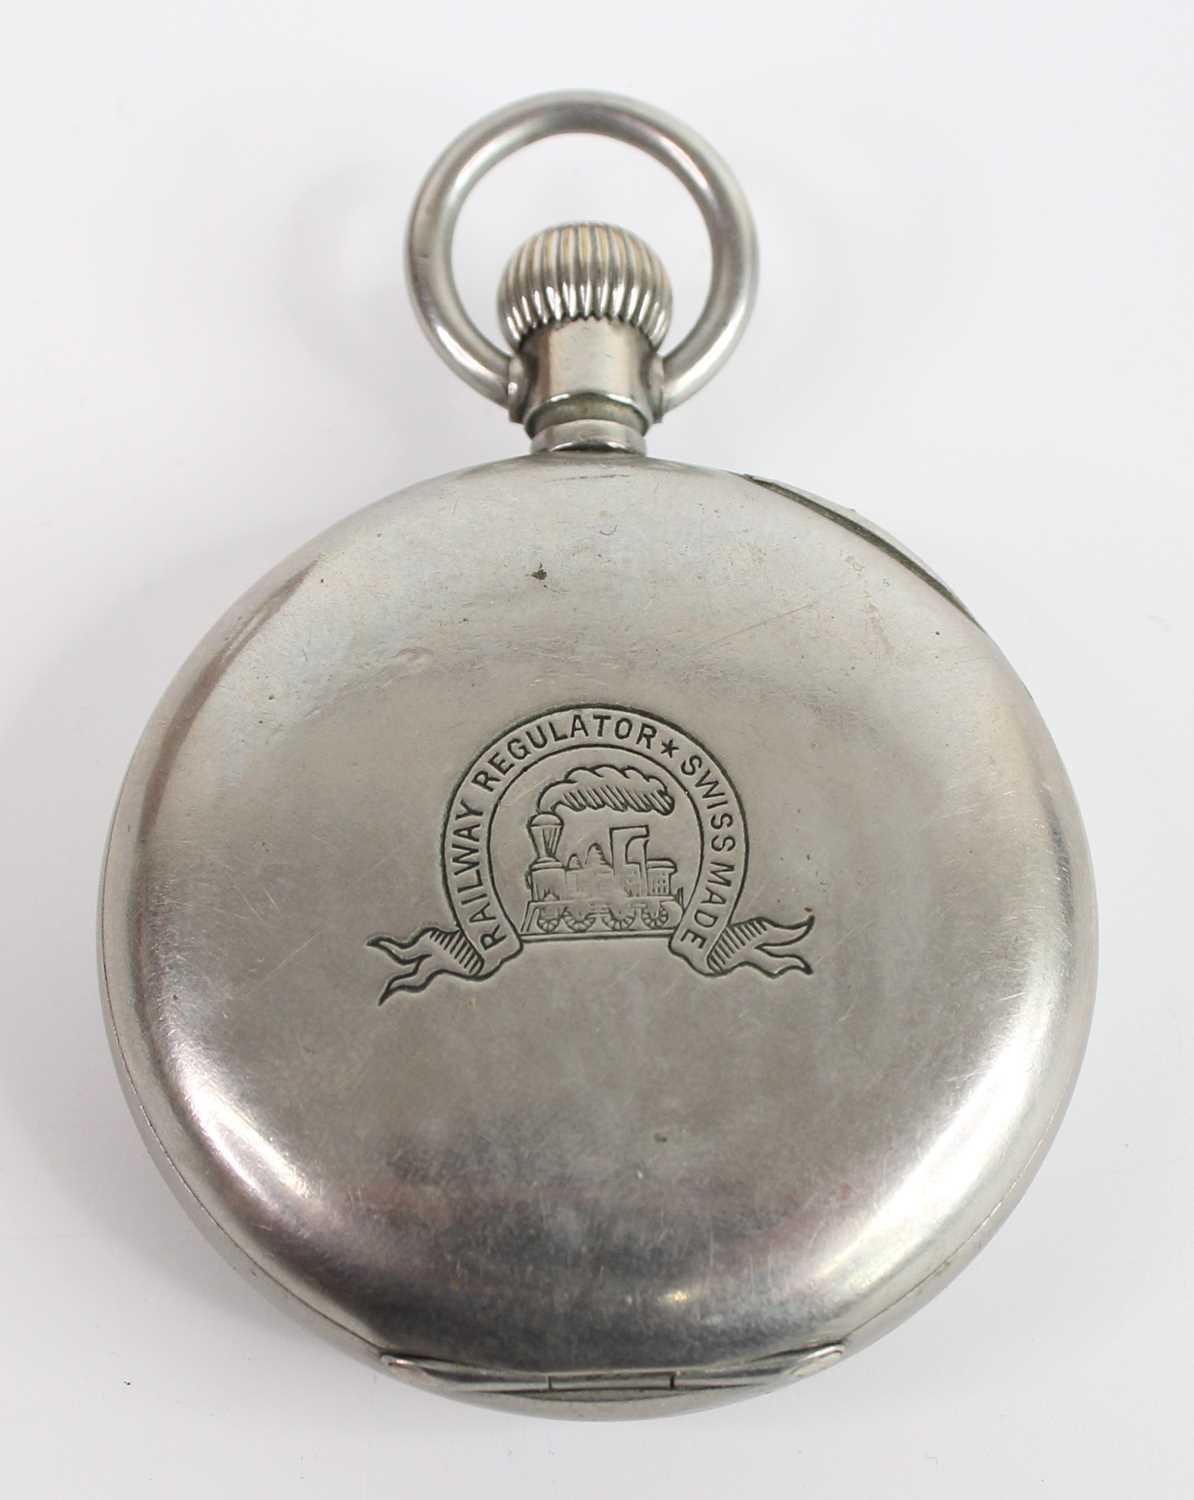 A West End Watch Company nickel cased gent's open faced keyless pocket watch, Champion Model 1905, - Image 2 of 3